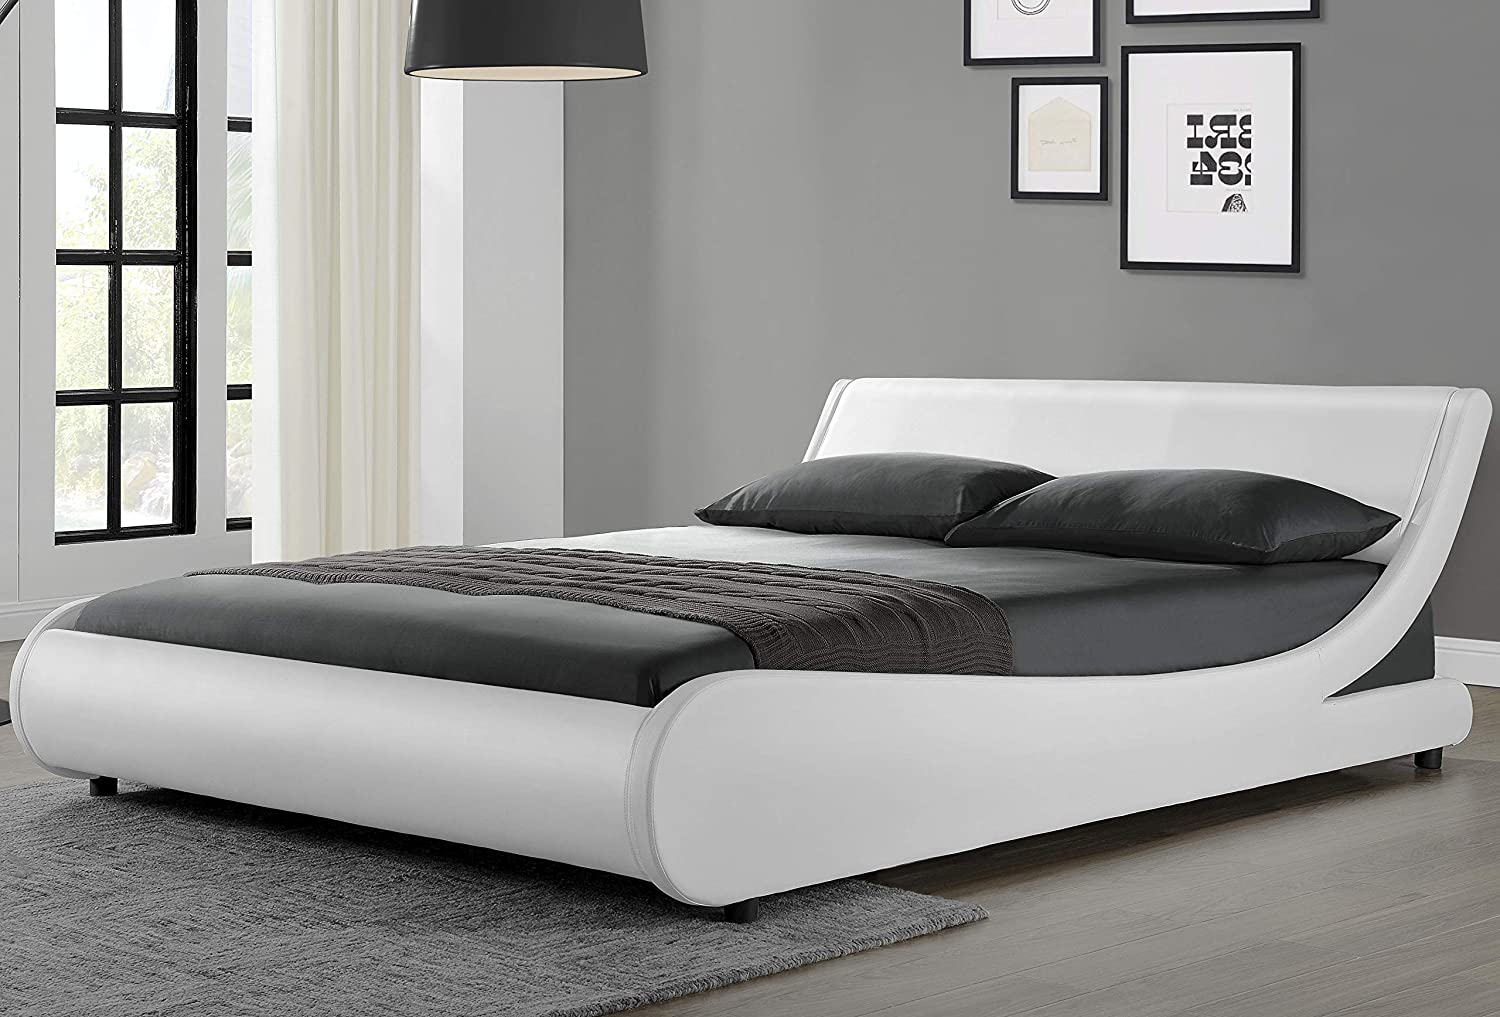 king mattress for flat bed